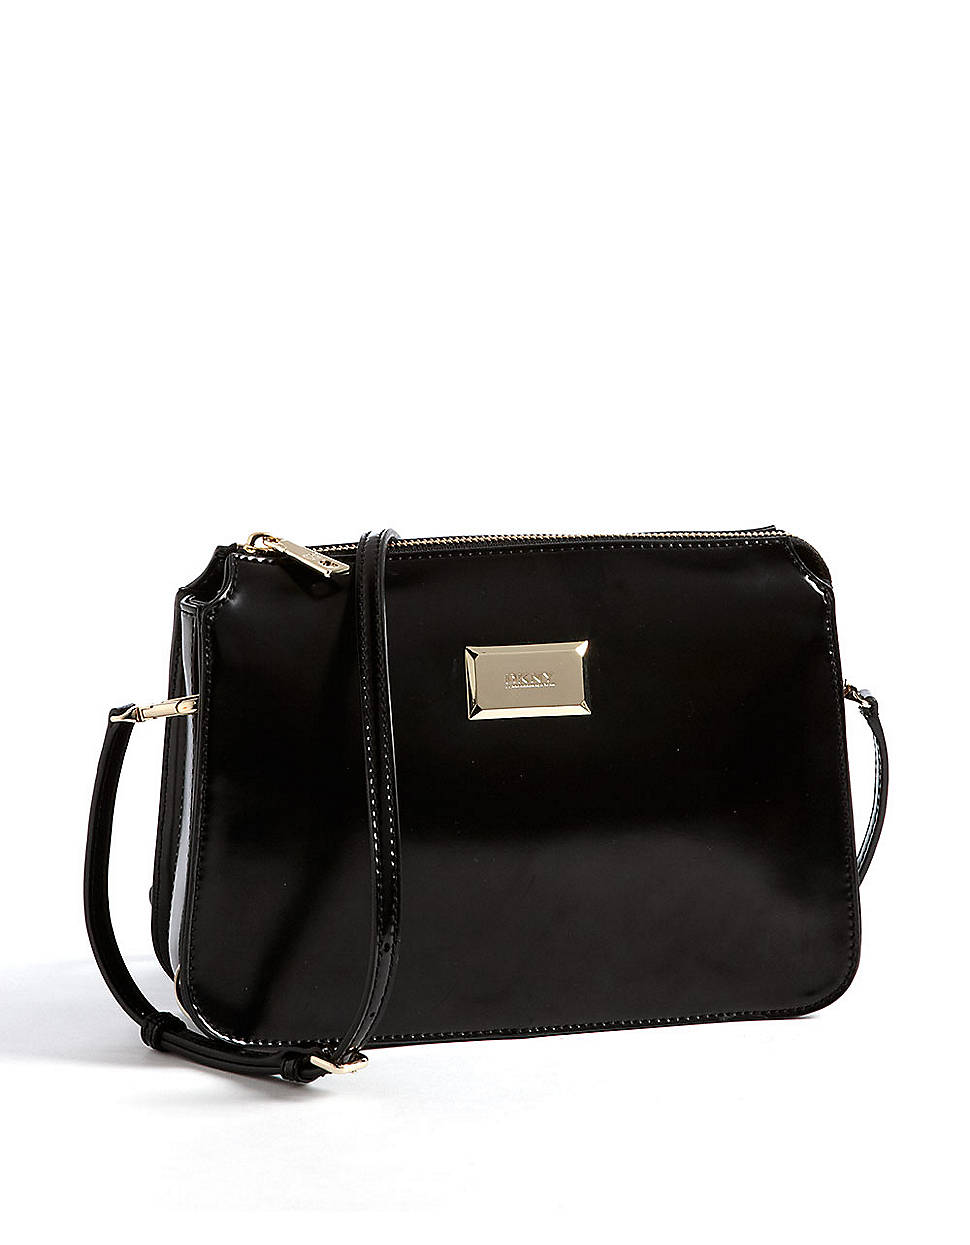 Lyst - Dkny Patent Leather Crossbody Bag in Black